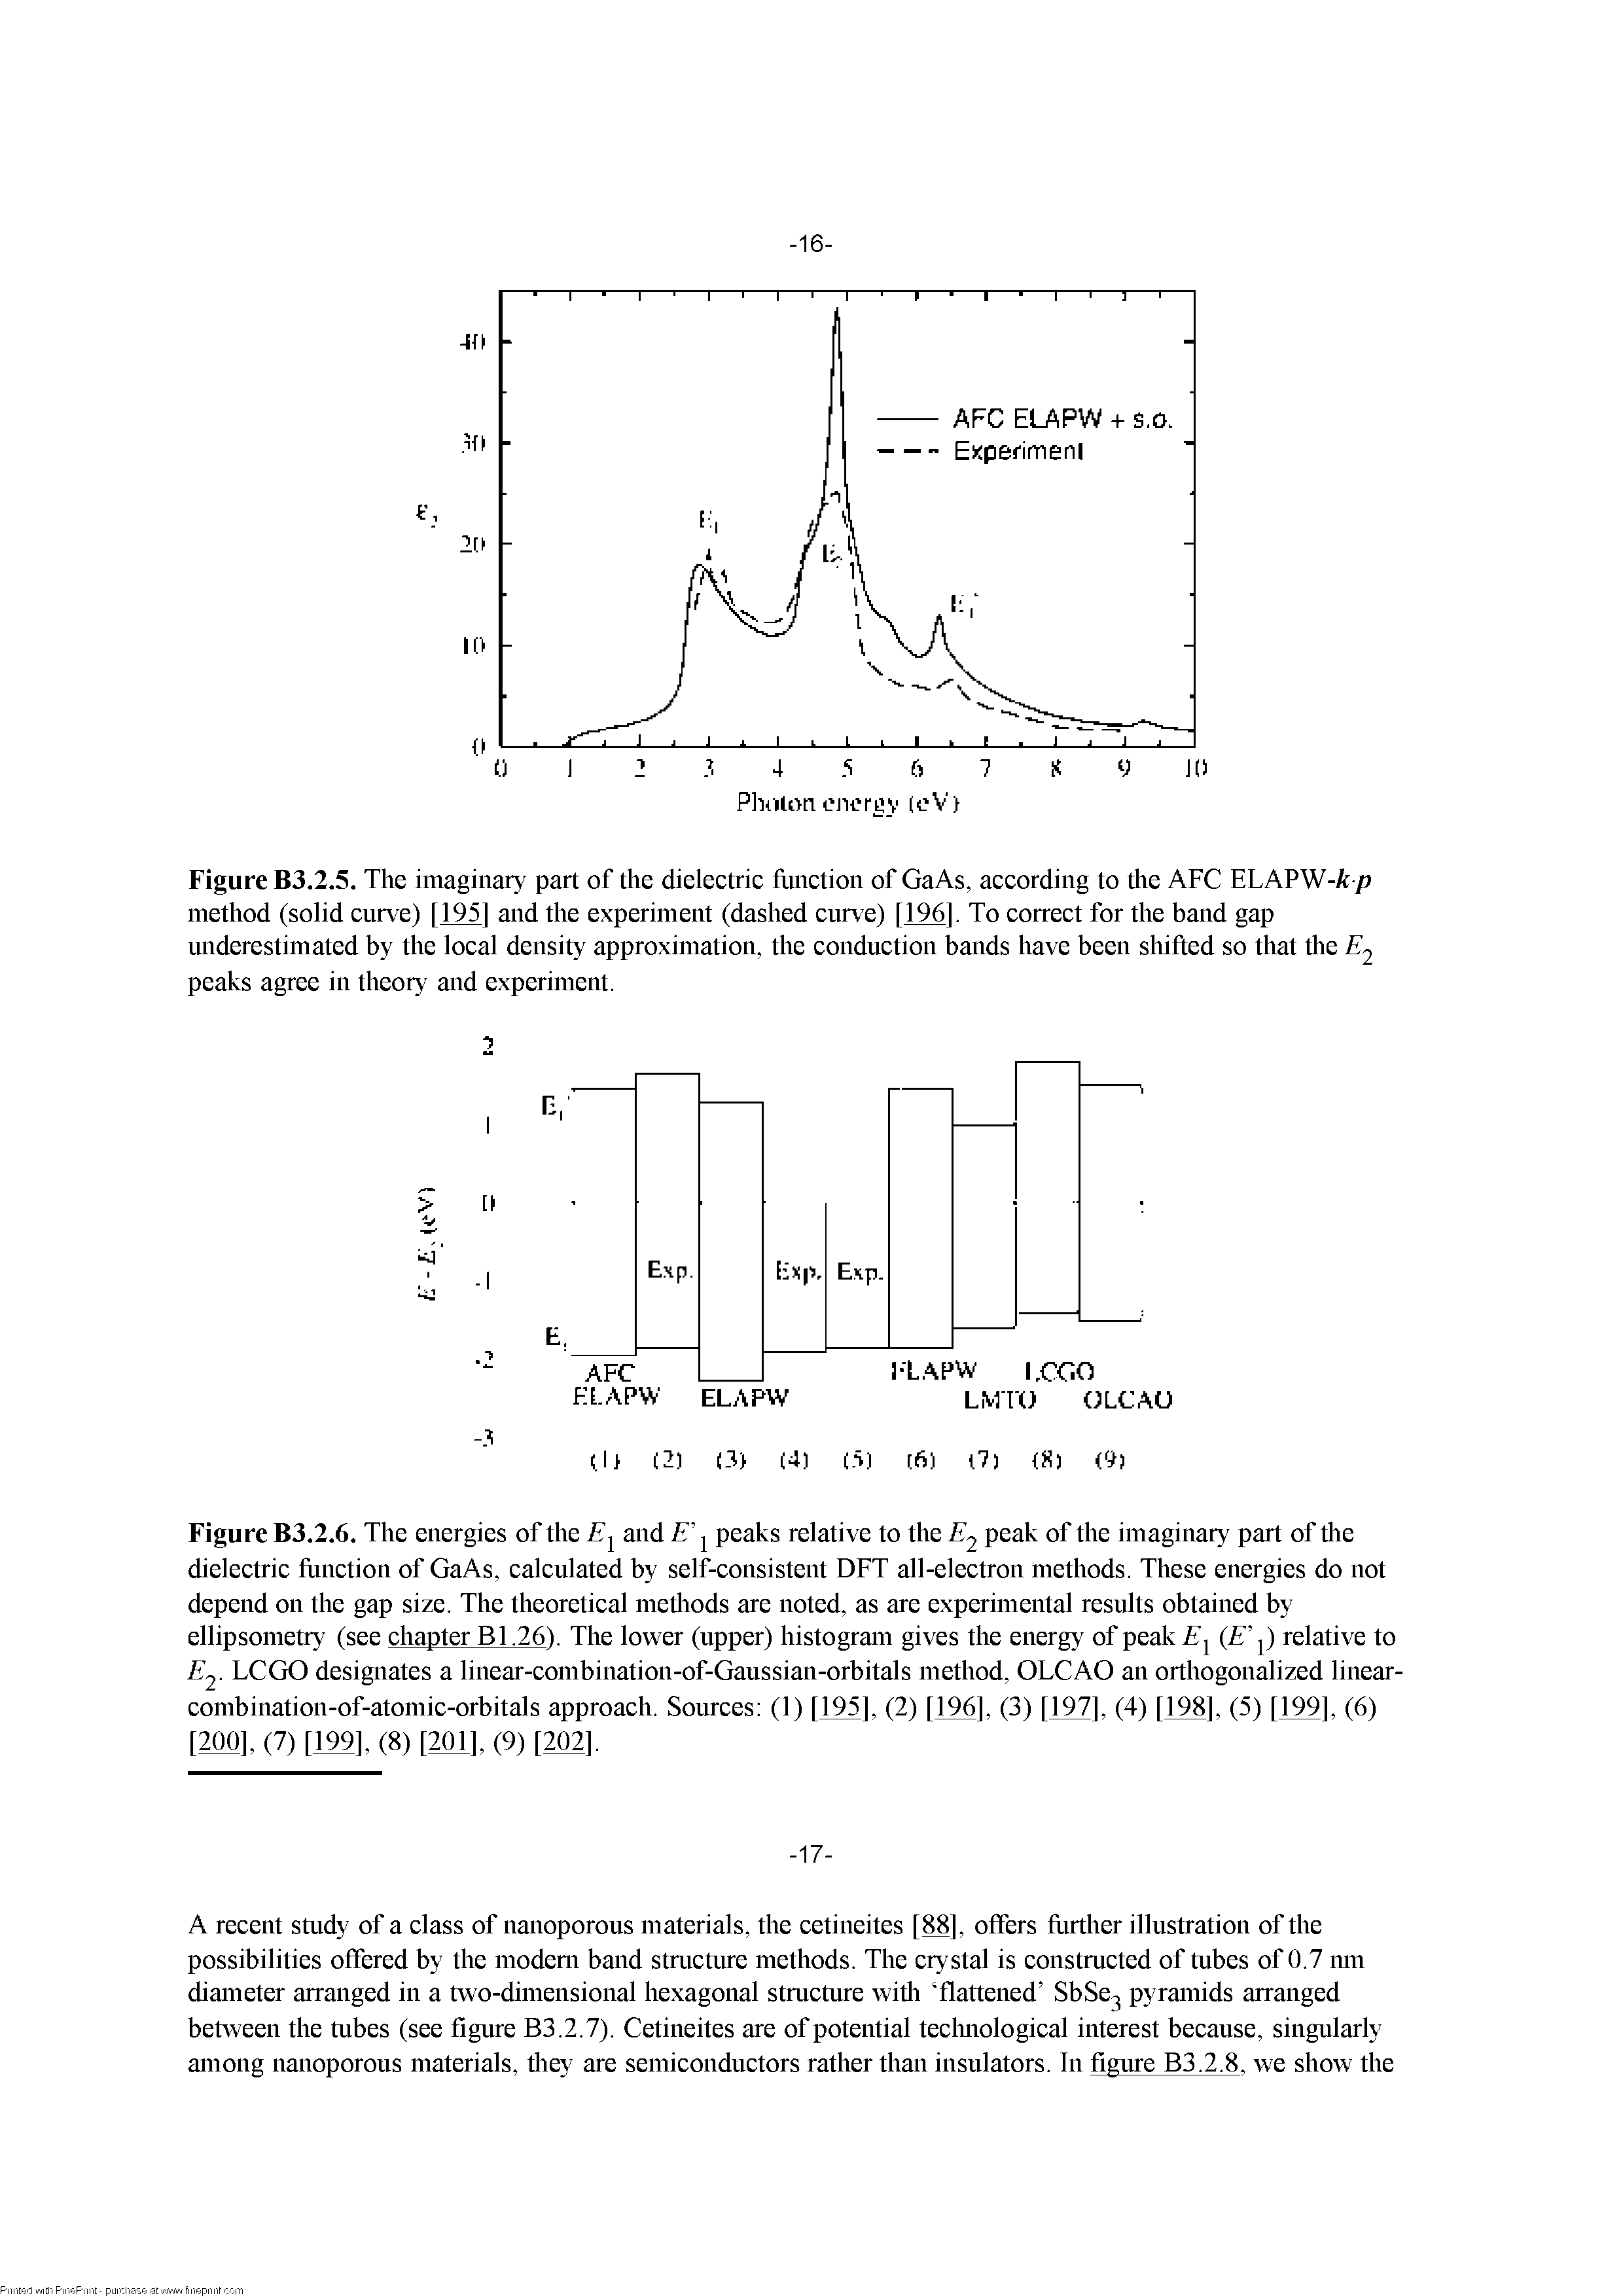 Figure B3.2.5. The imaginary part of the dieleetrie fiinetion of GaAs, aeeording to tire AFC ELAPW-/c p method (solid eiirve) [195] and the experiment (dashed enrve) [196], To eorreet for the band gap underestimated by the loeal density approximation, the eonduetion bands have been shifted so that tlie 2 peaks agree in theory and experiment.